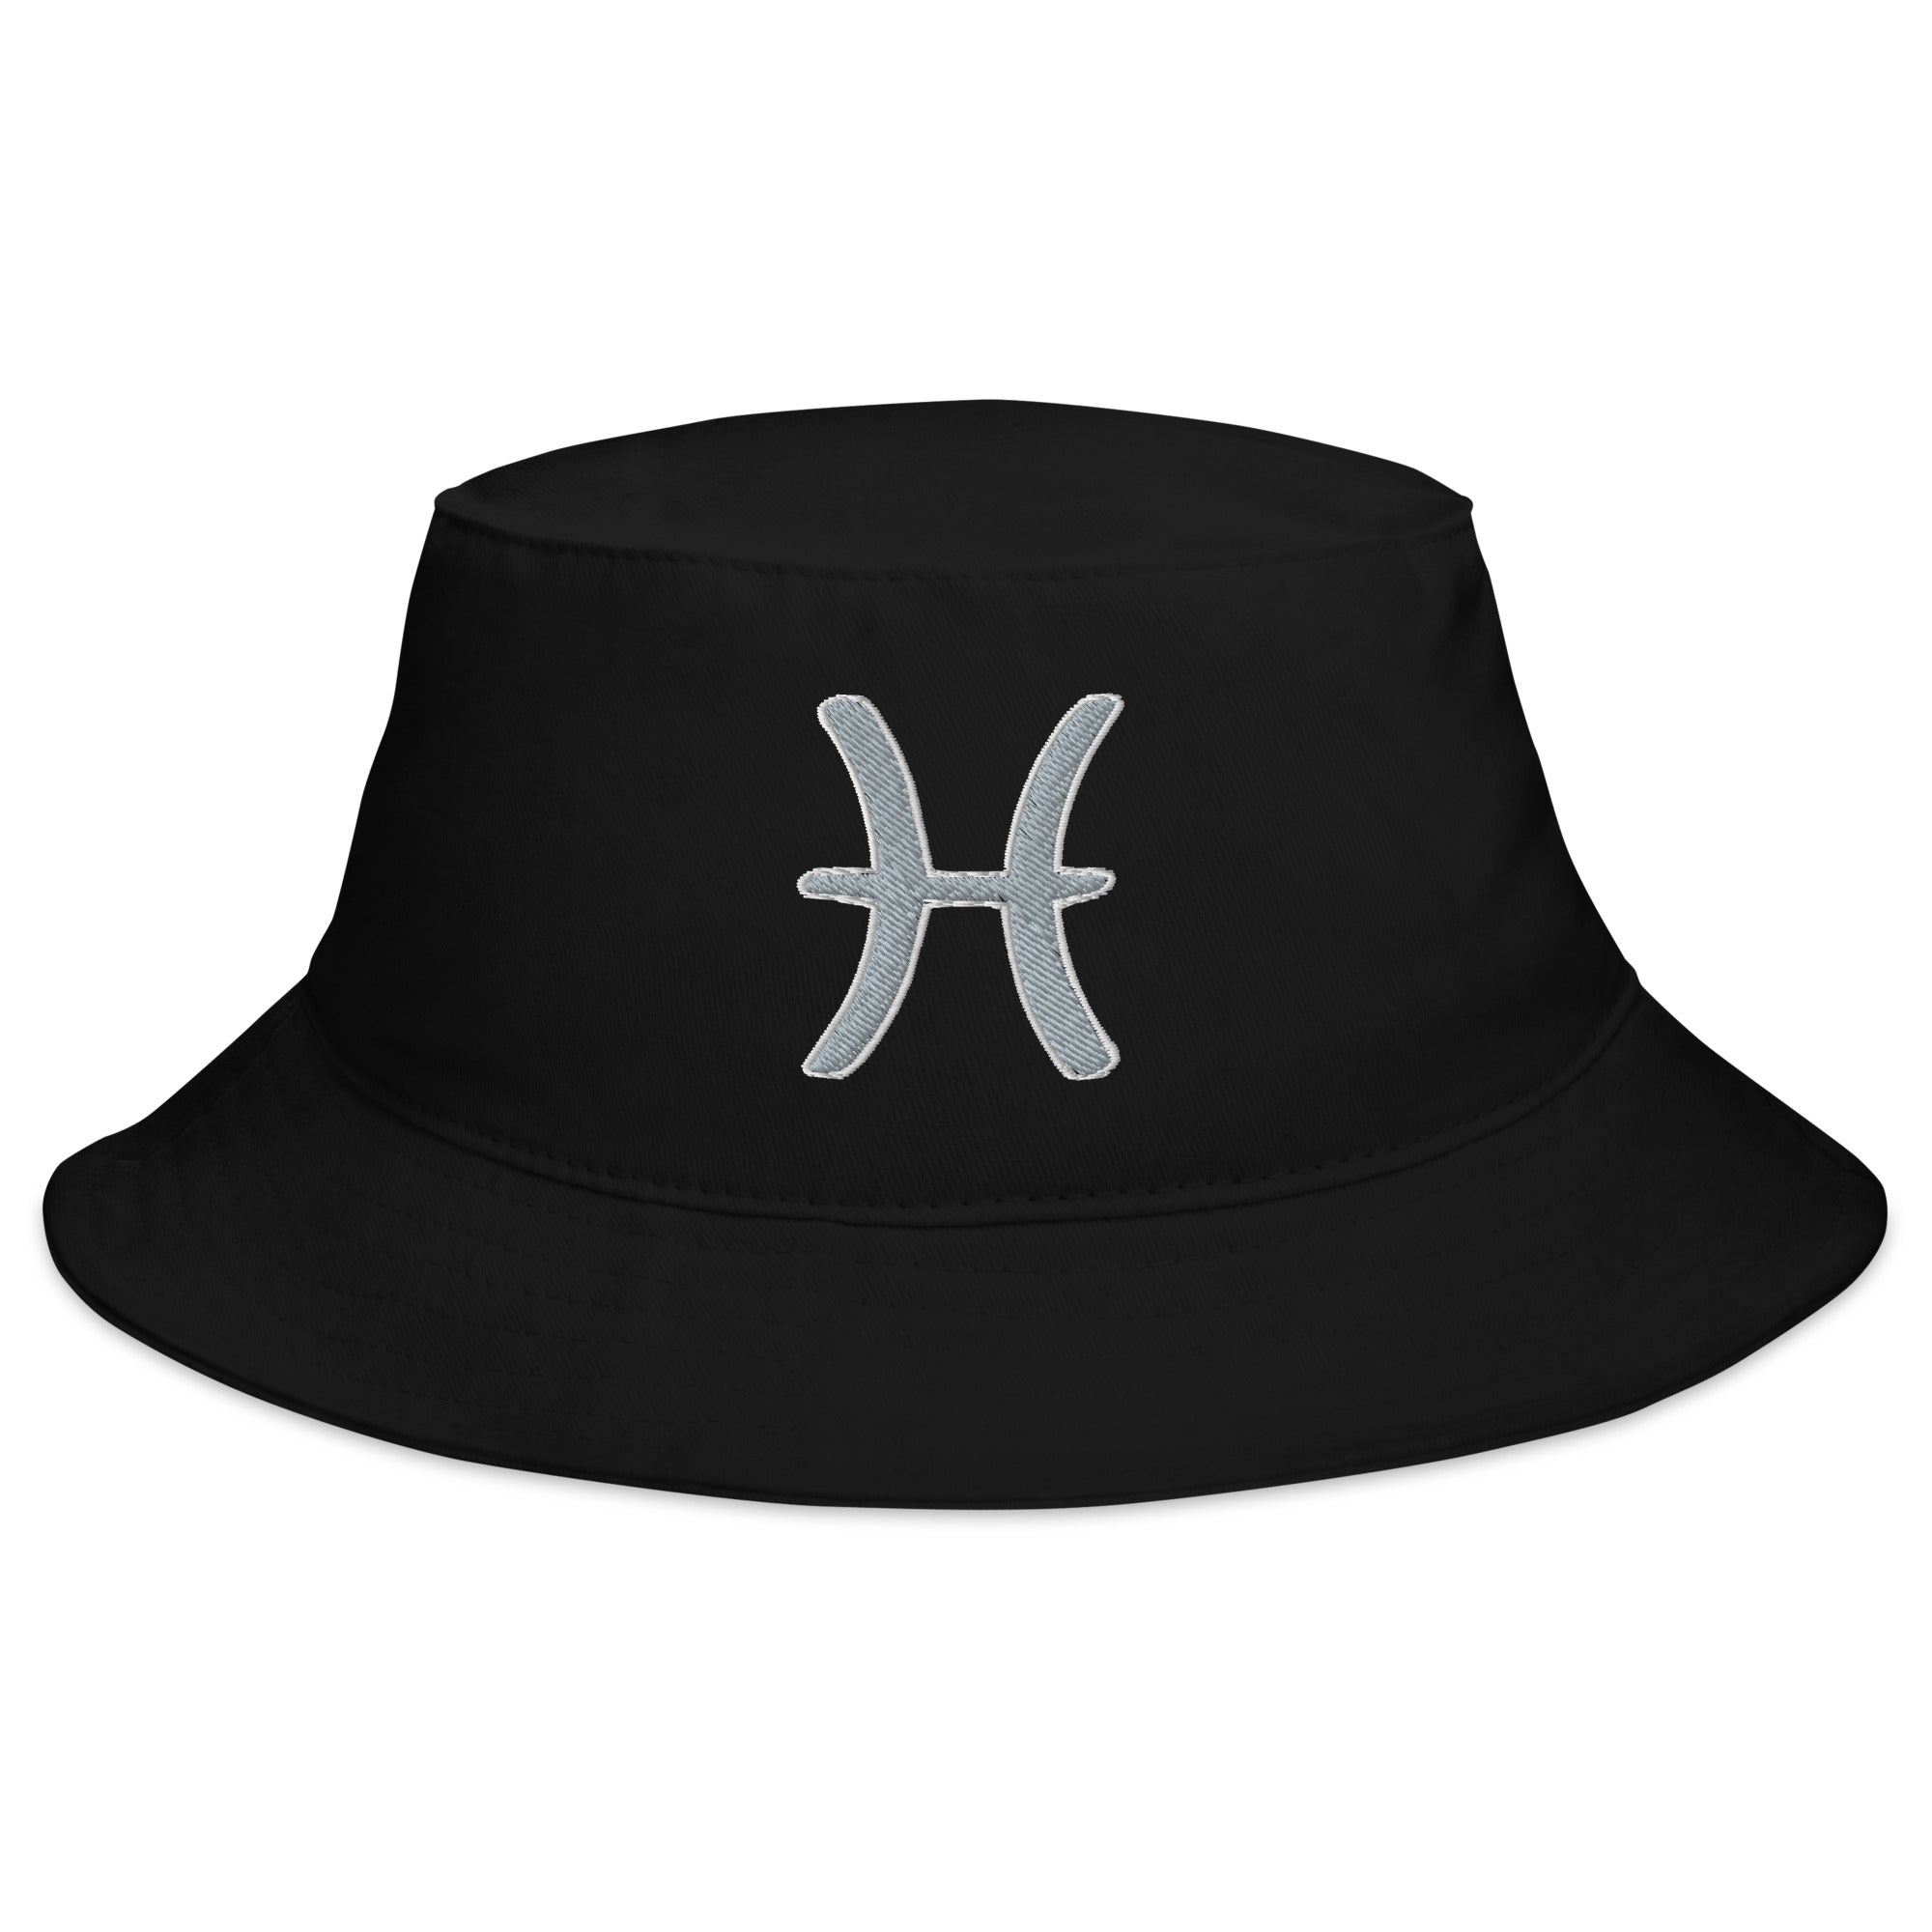 Zodiac Sign Pisces Embroidered Bucket Hat Astrology Horoscope